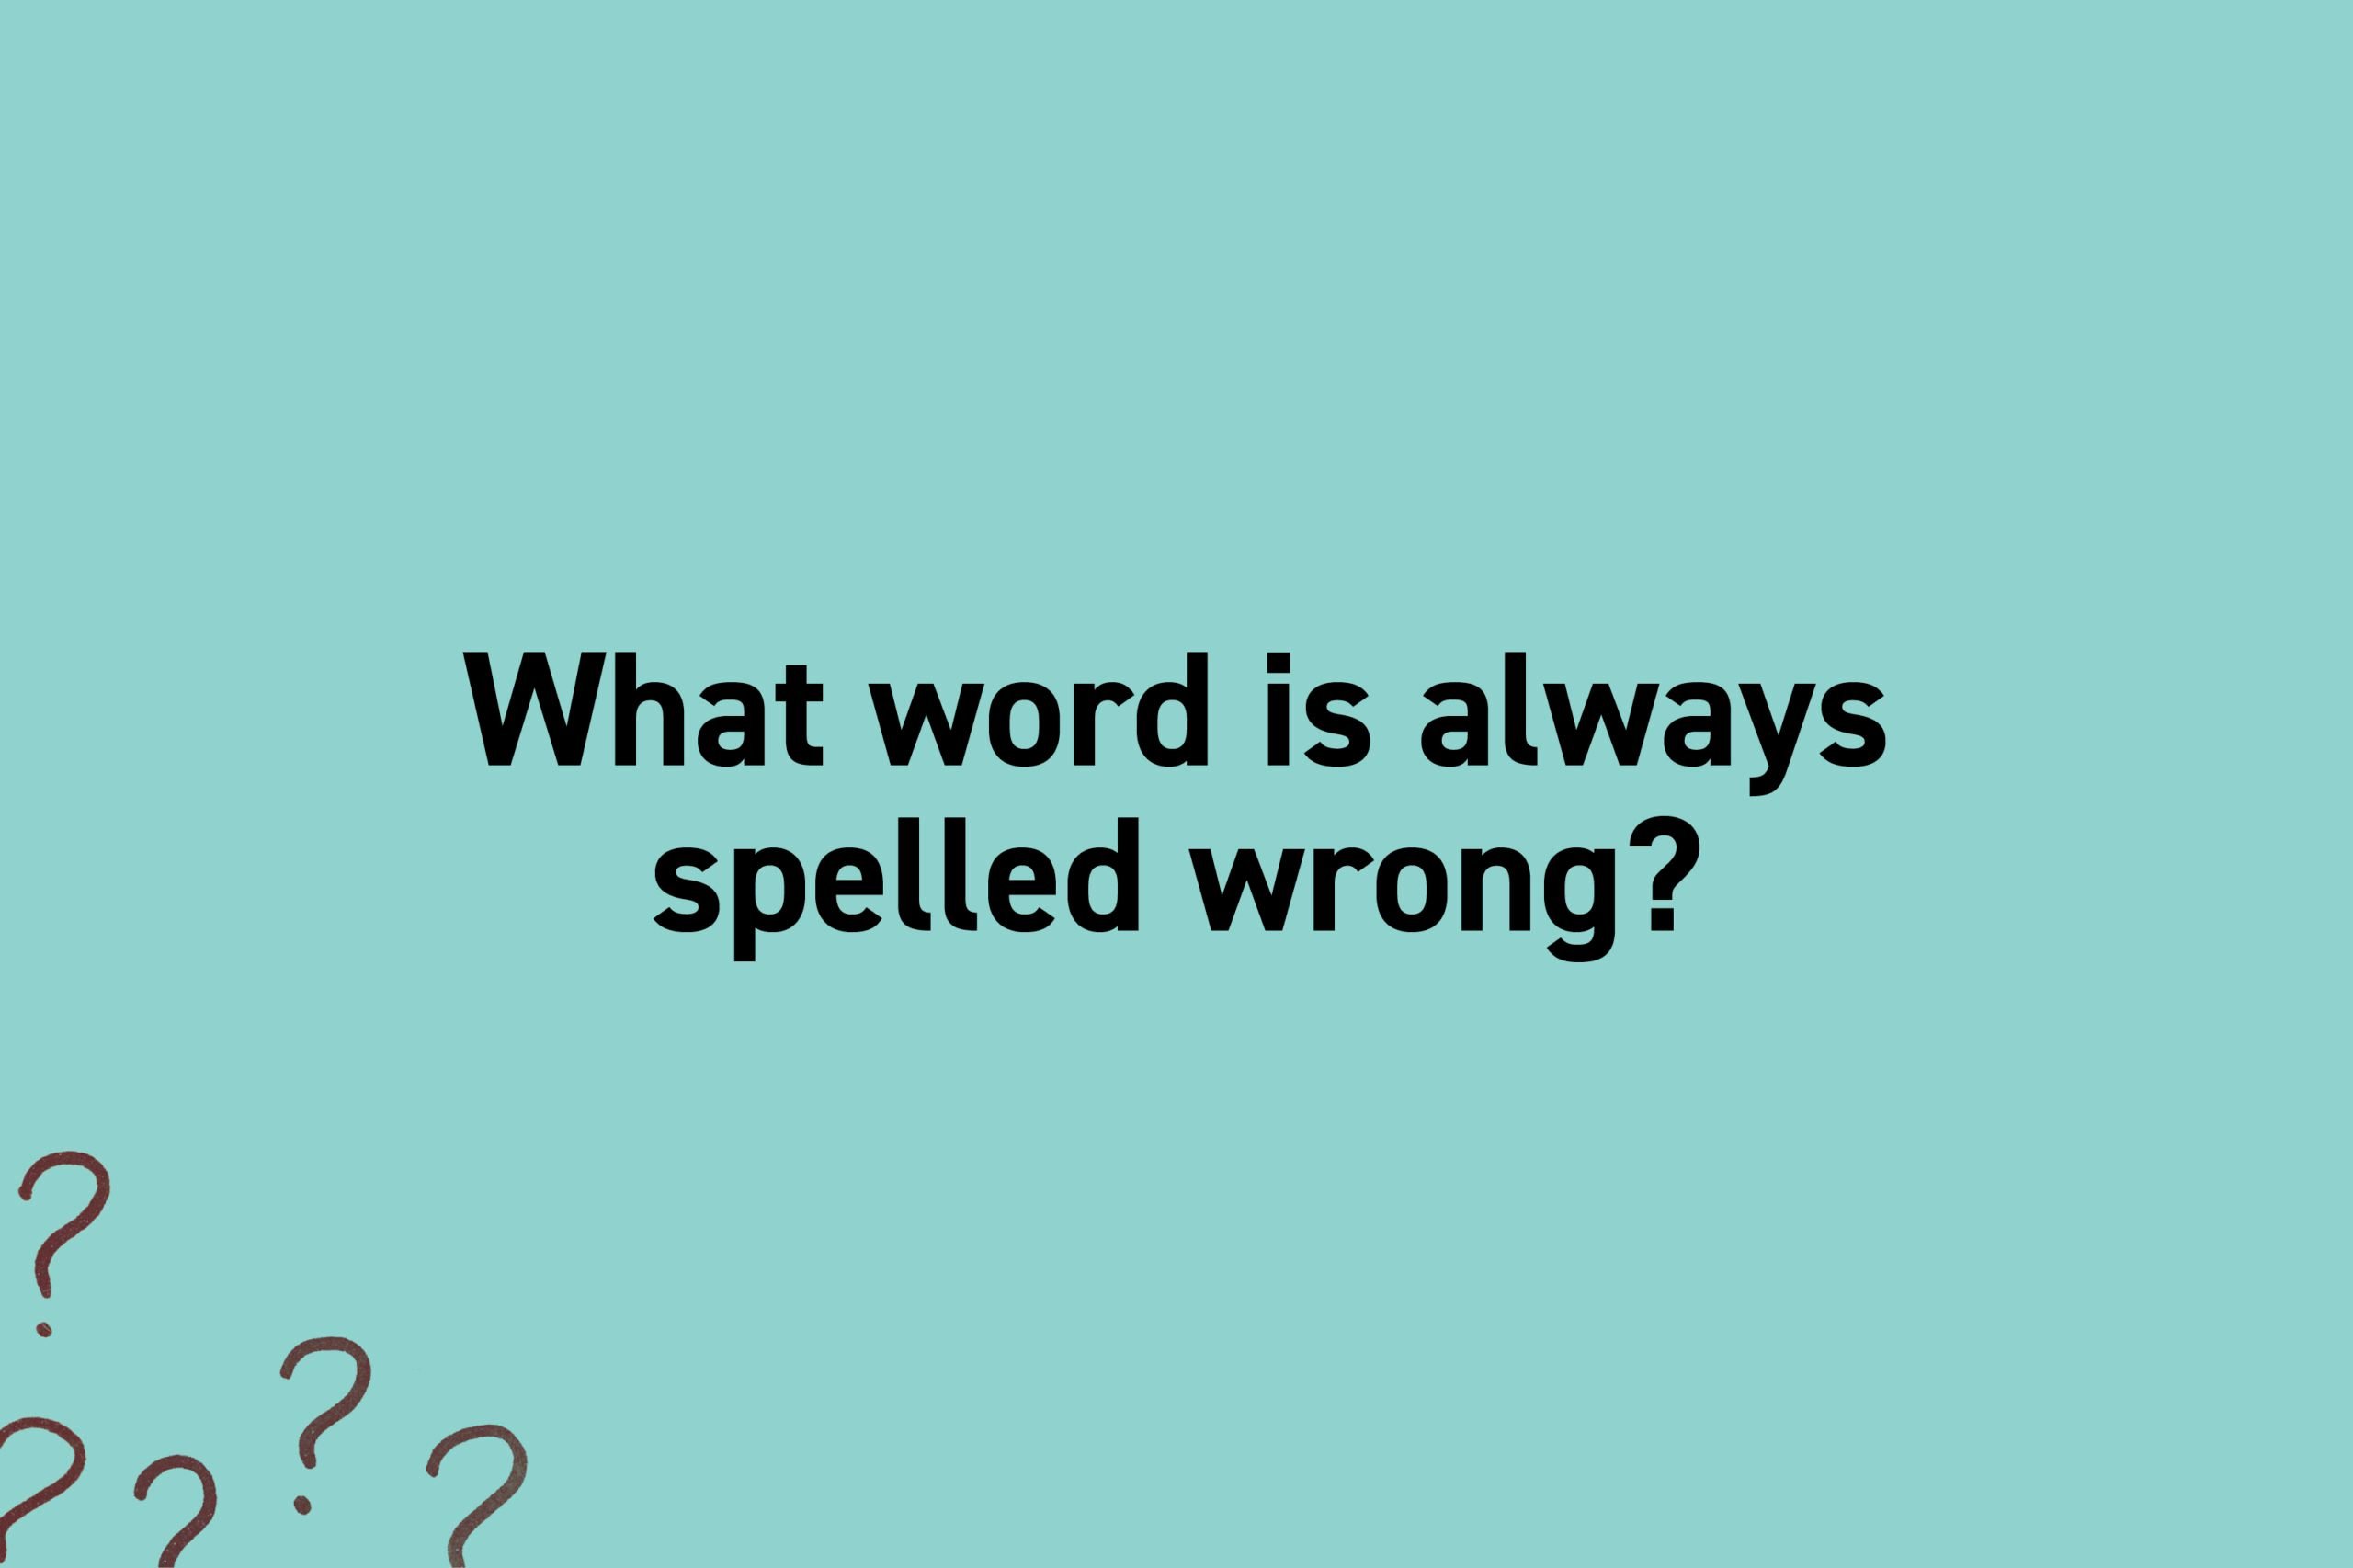 What word is always spelled wrong?